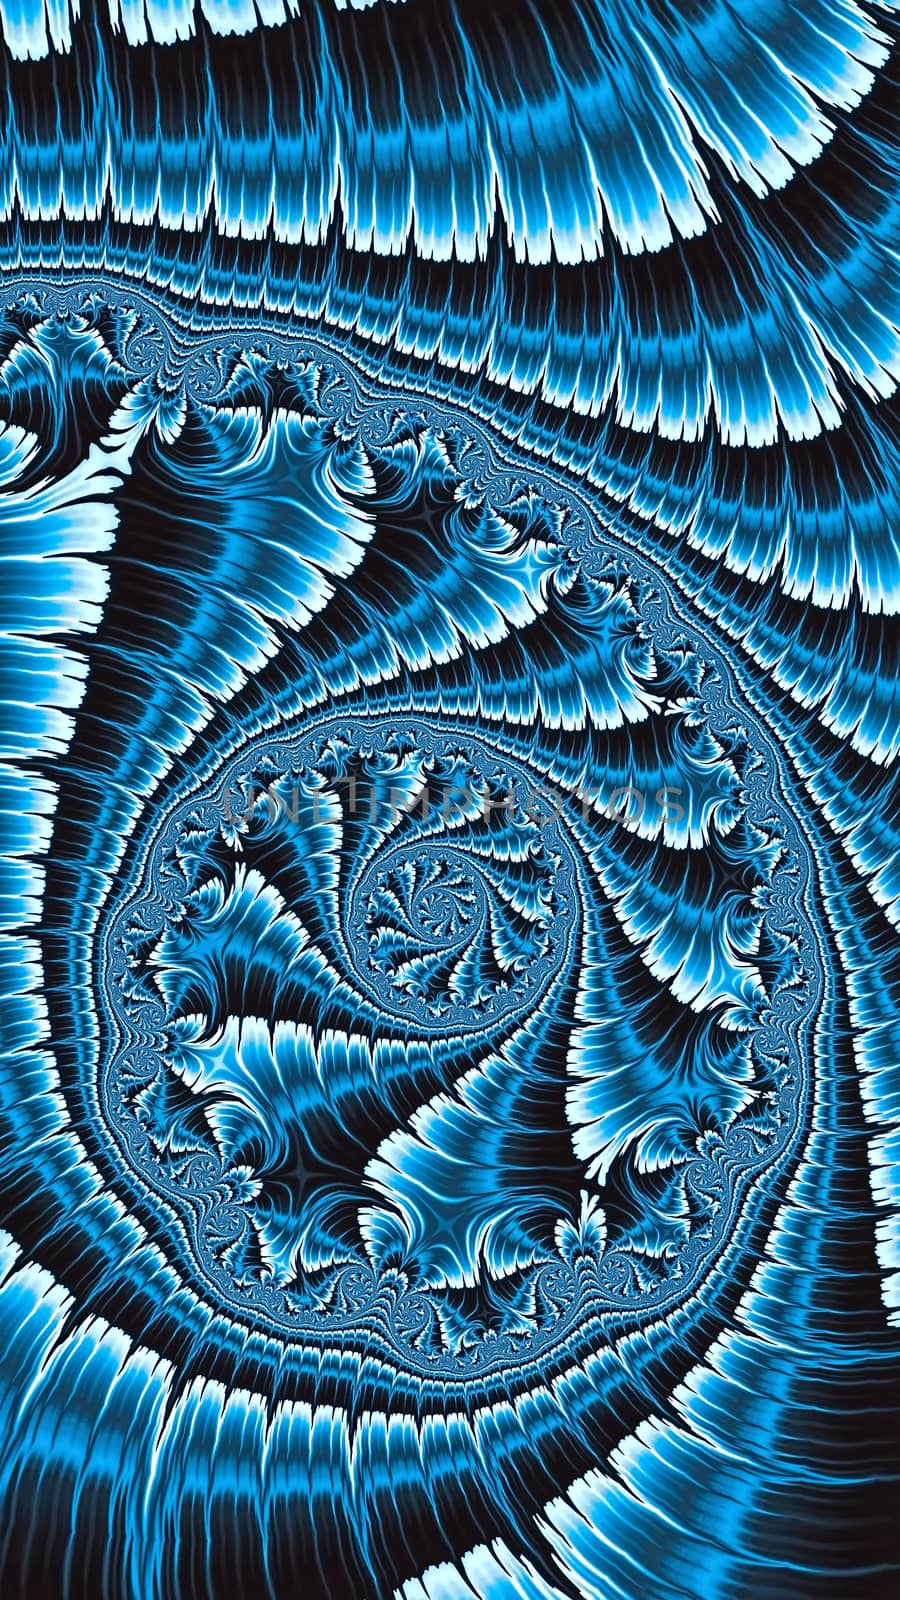 Spiral ornament - abstract computer-generated image. Fractal art: striped helix pattern. Blue helix, lines and curls. For prints, covers, web design.